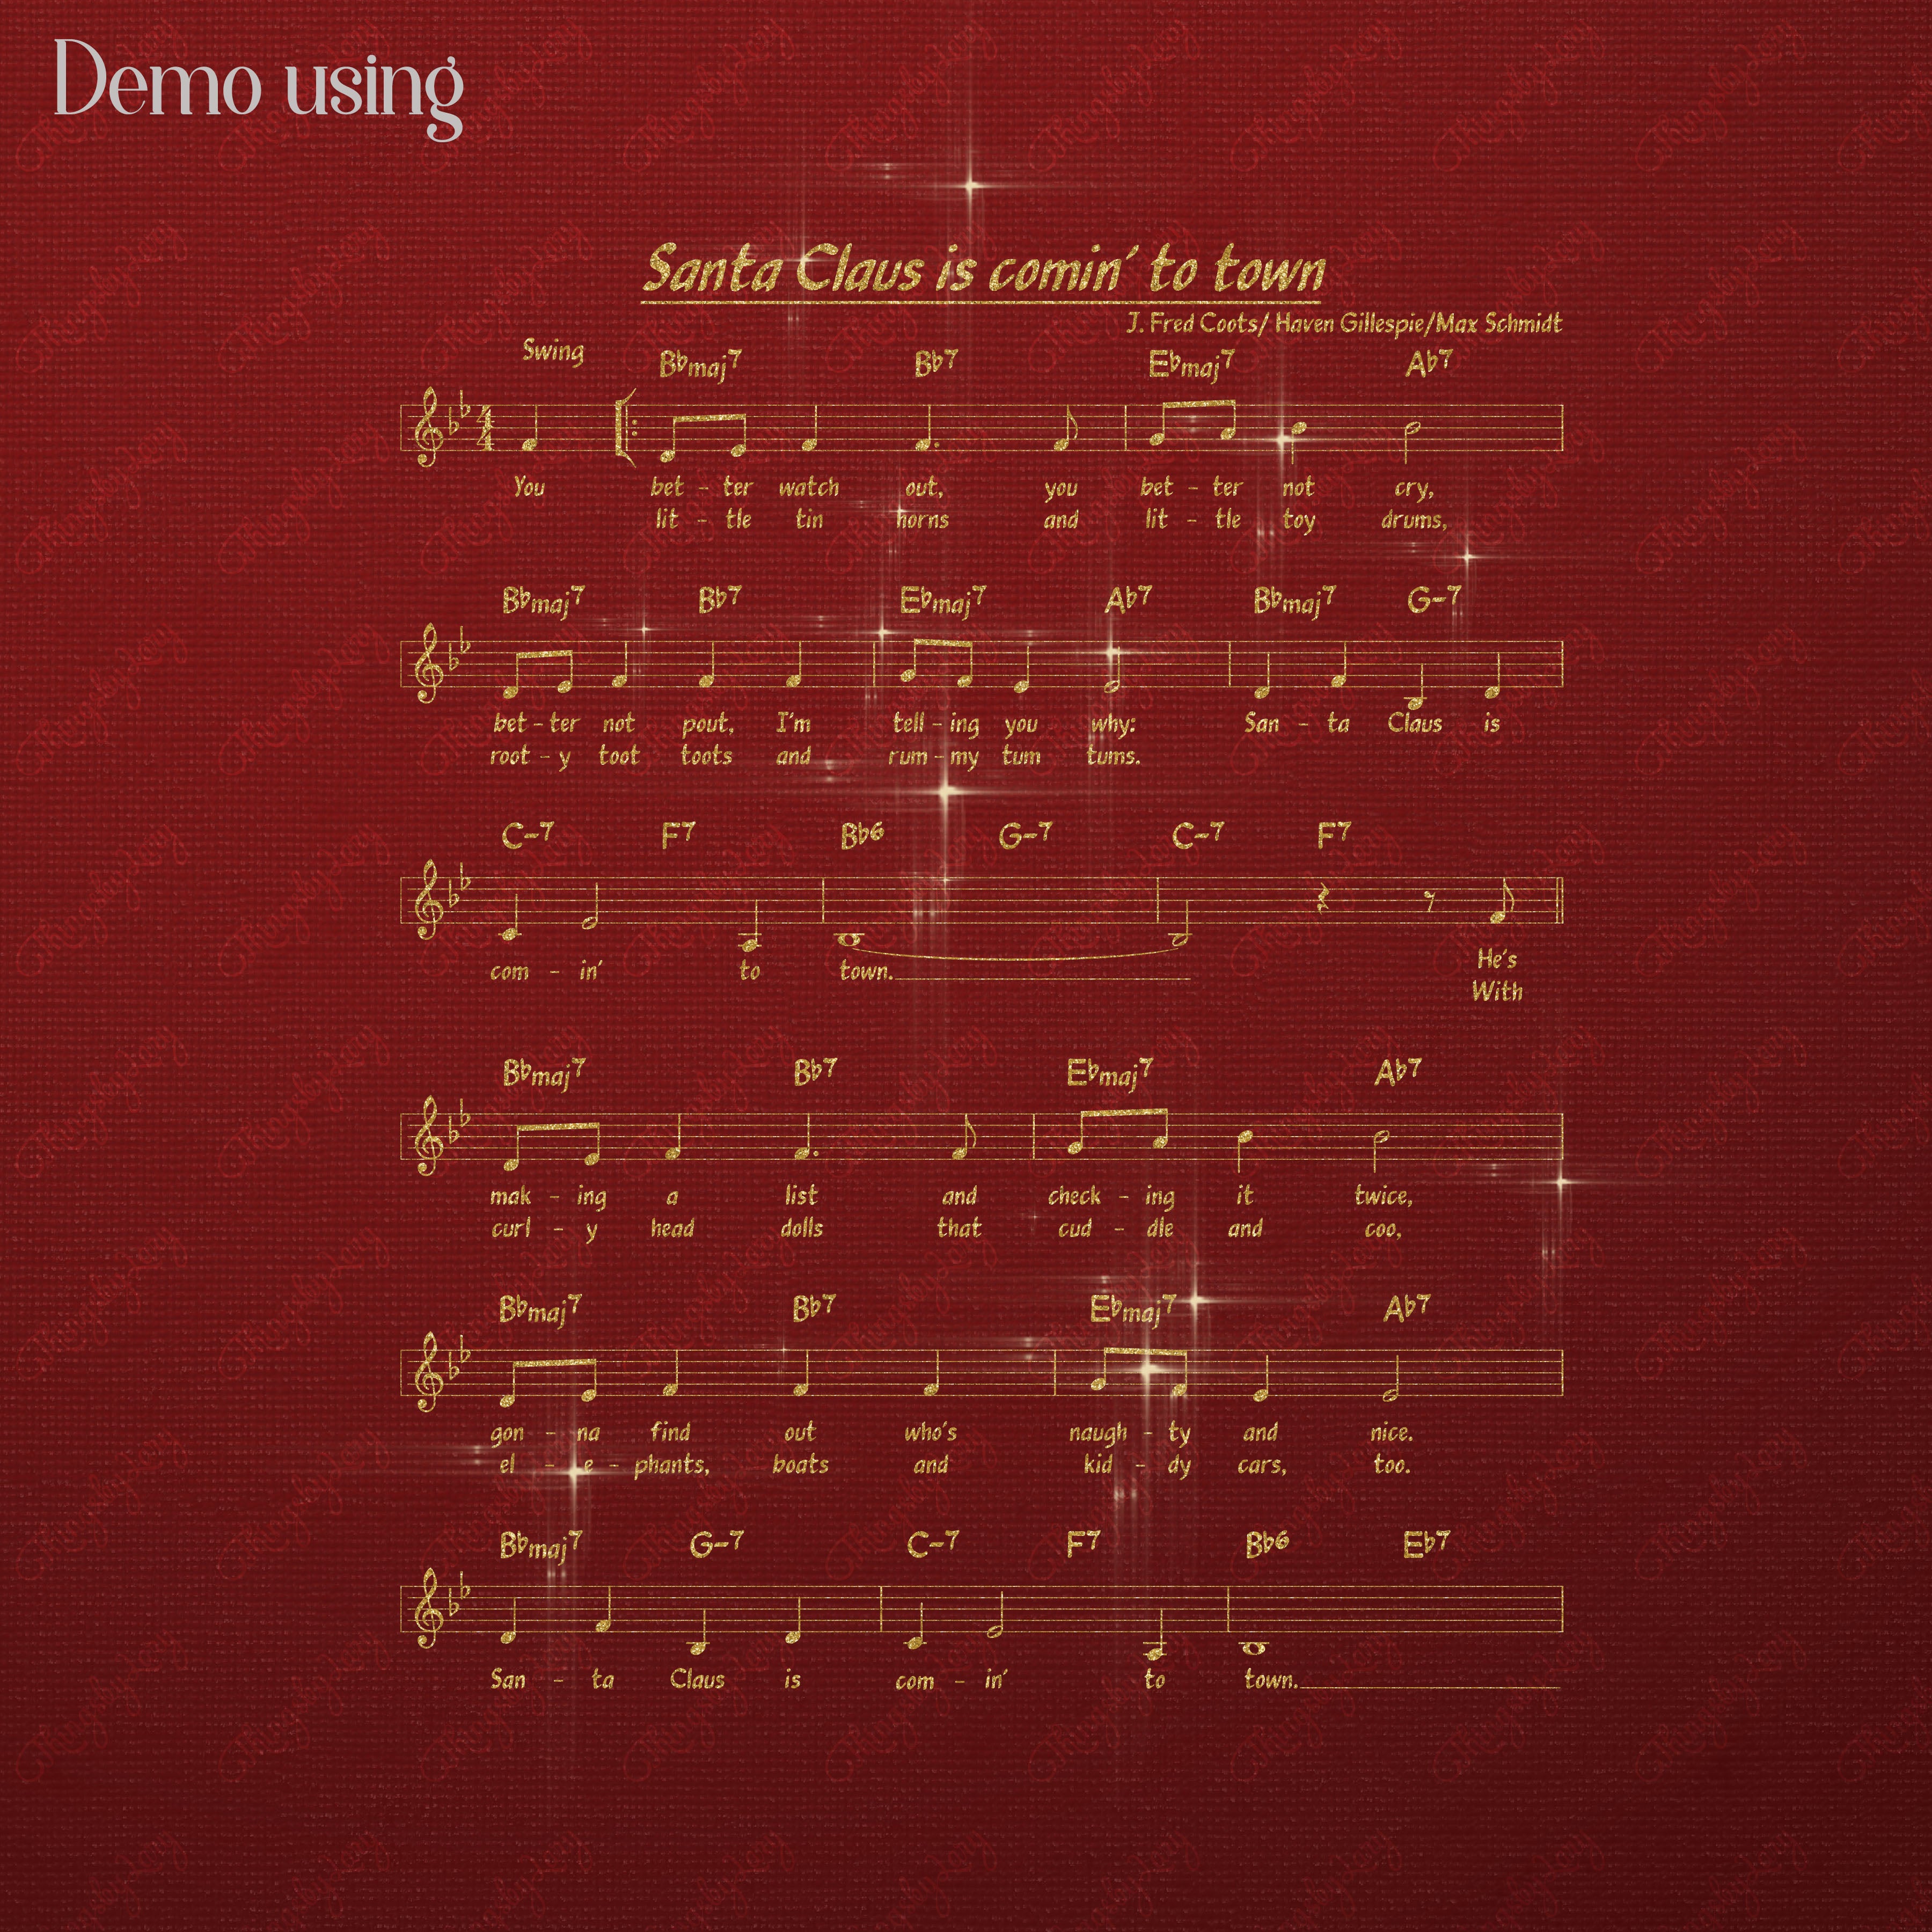 20 Gold Glitter Christmas Songs Music Sheets Overlay PNG Images